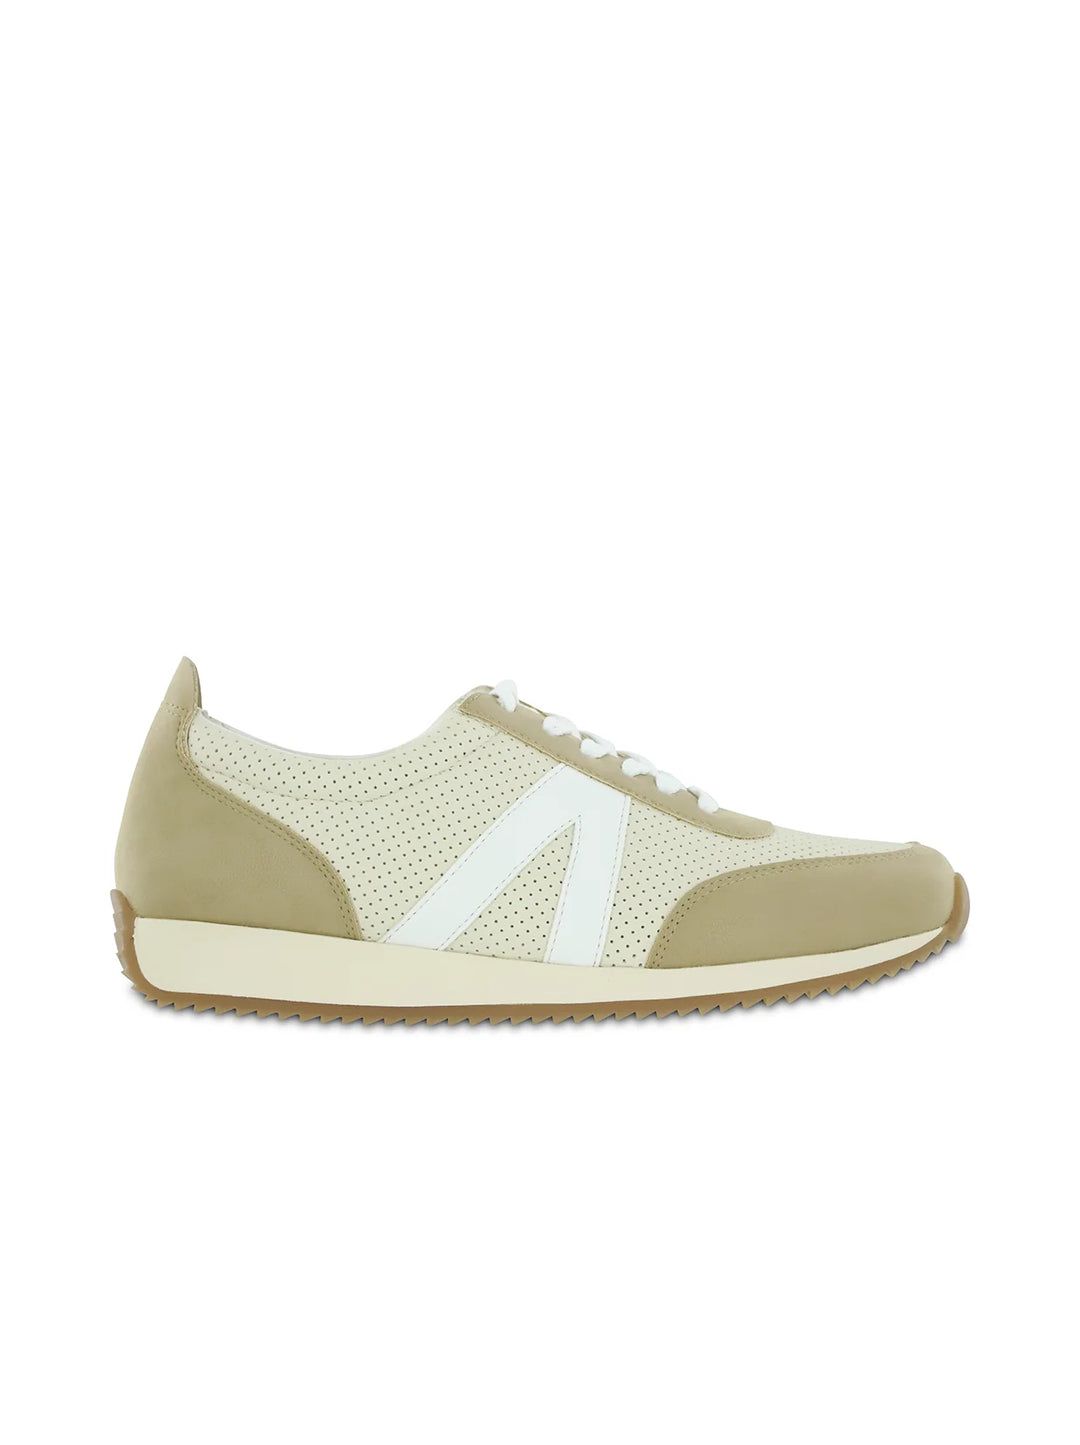 The MIA Kable Ivory/Natural Sneaker